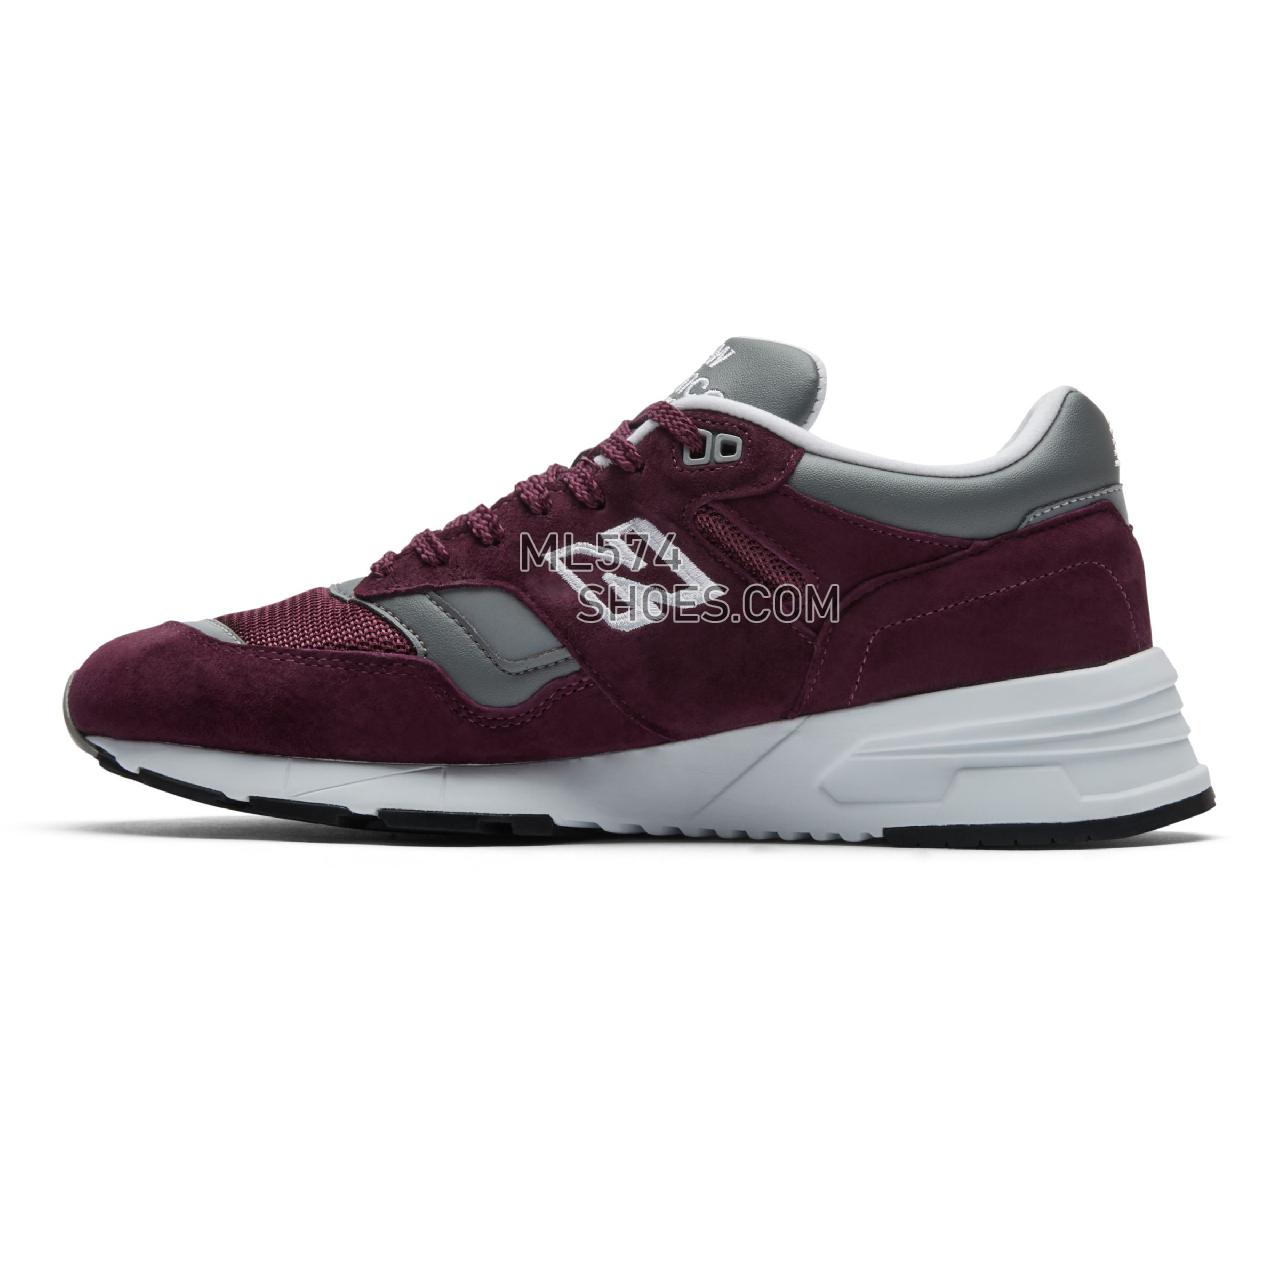 New Balance Made in UK 1530 - Men's Made in UK 1530 - Burgundy with Grey and White - M1530BUR